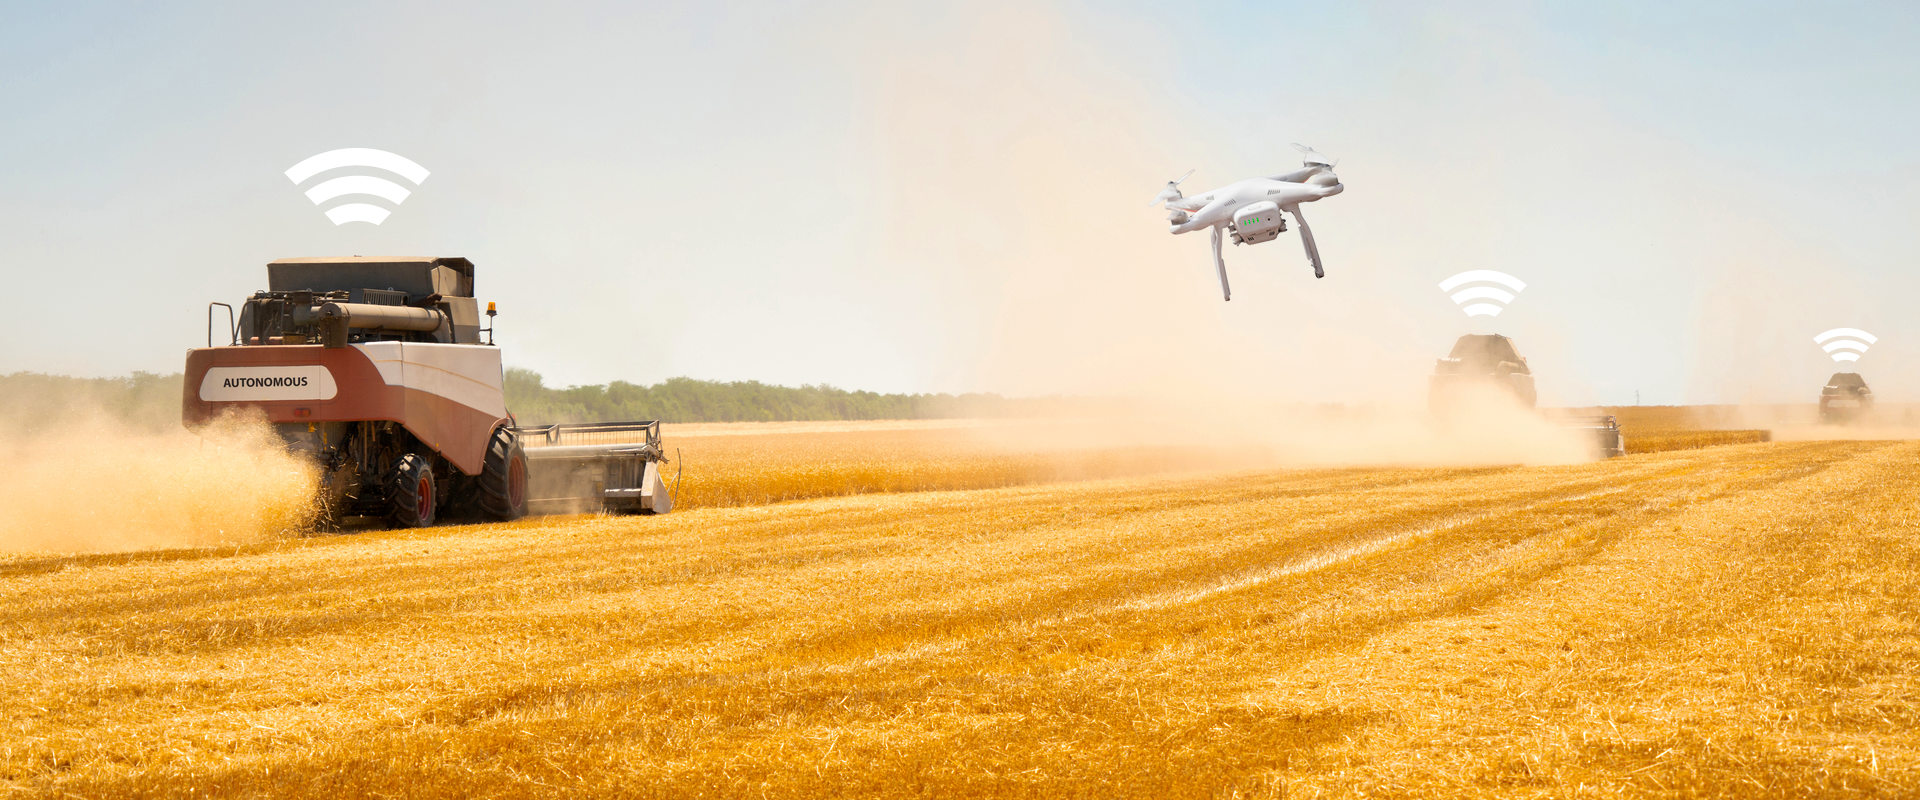 New farming technologies are making farms more profitable and causing land prices to skyrocket